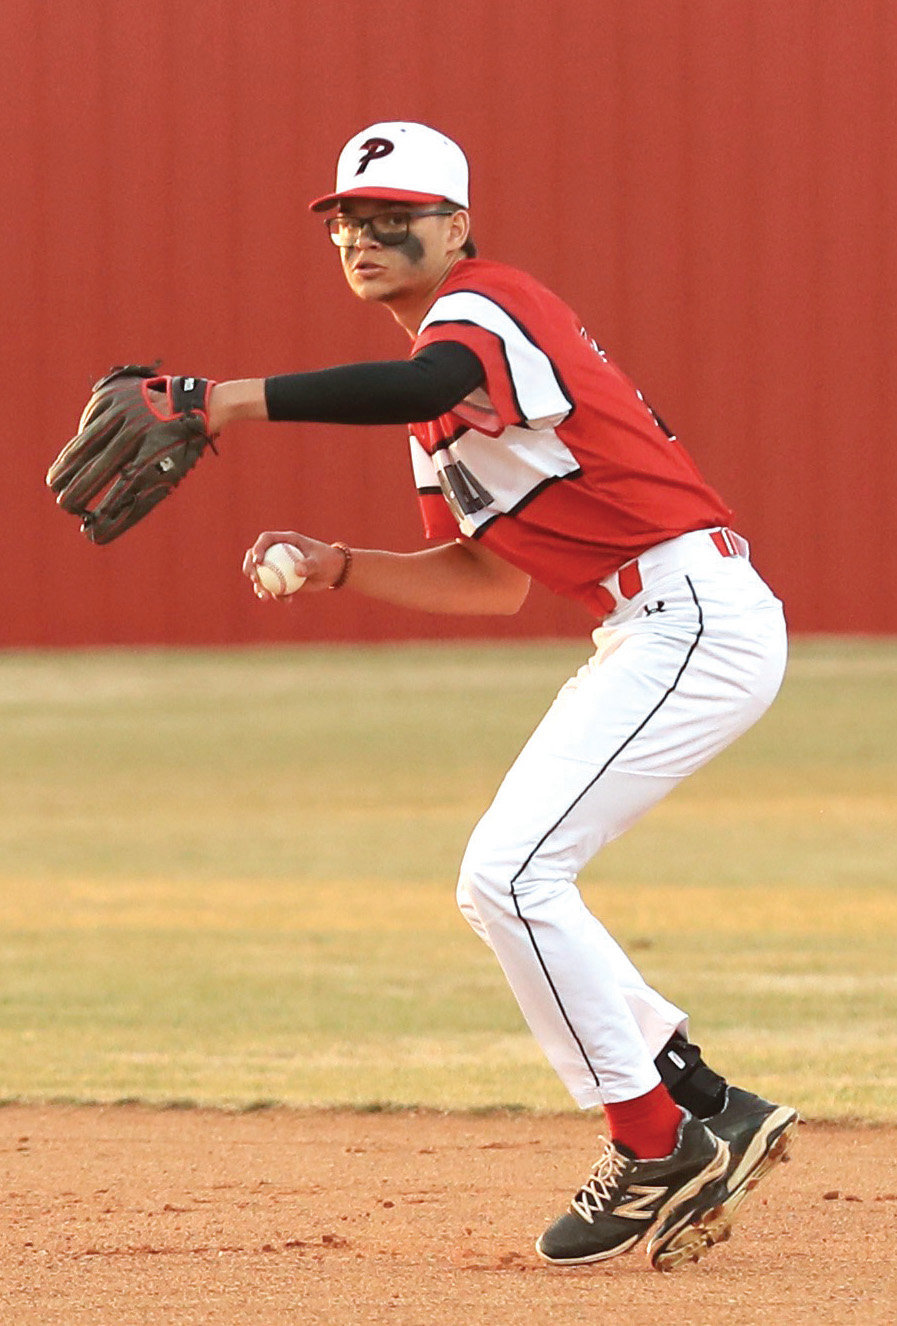 Purcell senior Quentin Goforth fields a ball and comes up throwing to first base for an out against Wayne during the Dragons’ 8-0 win over the Bulldogs. Story on page 9B.